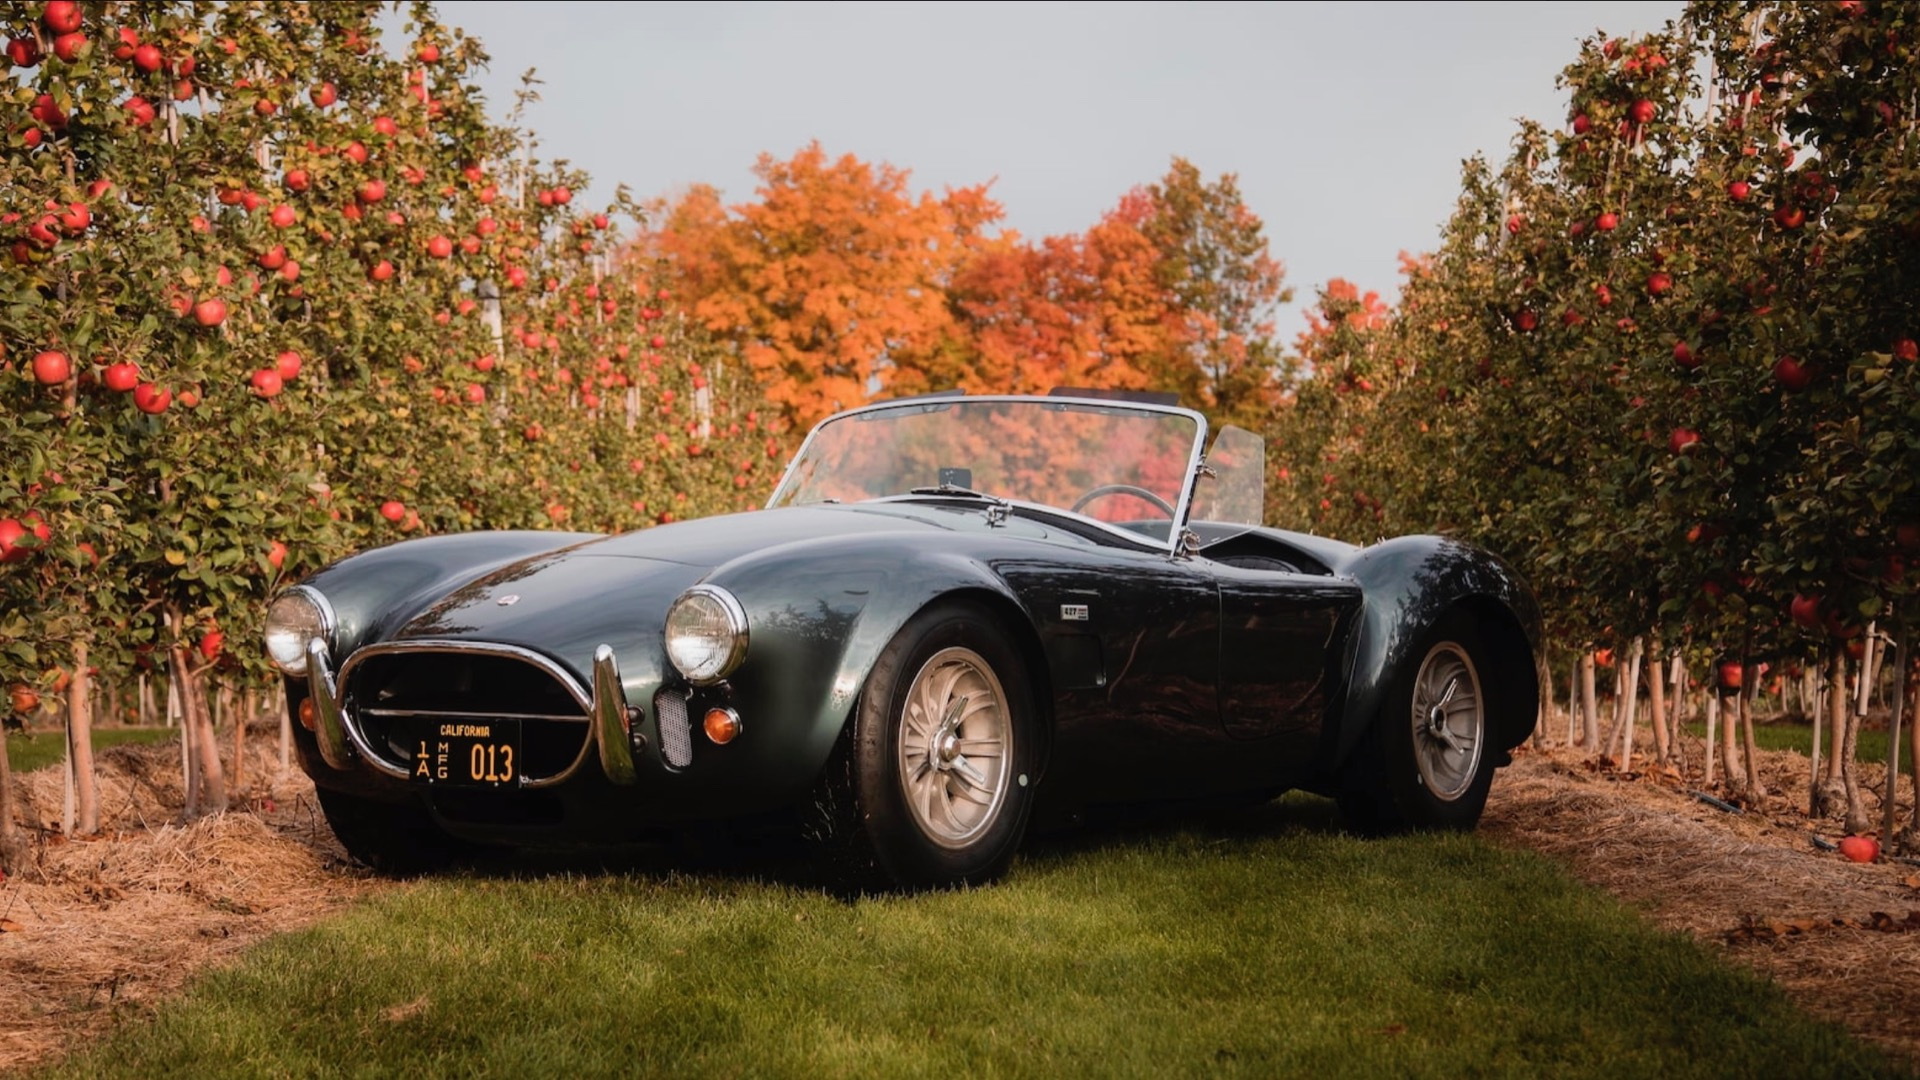 1965 Shelby 427 Cobra owned by Carroll Shelby - Photo Credit: Mecum Auctions